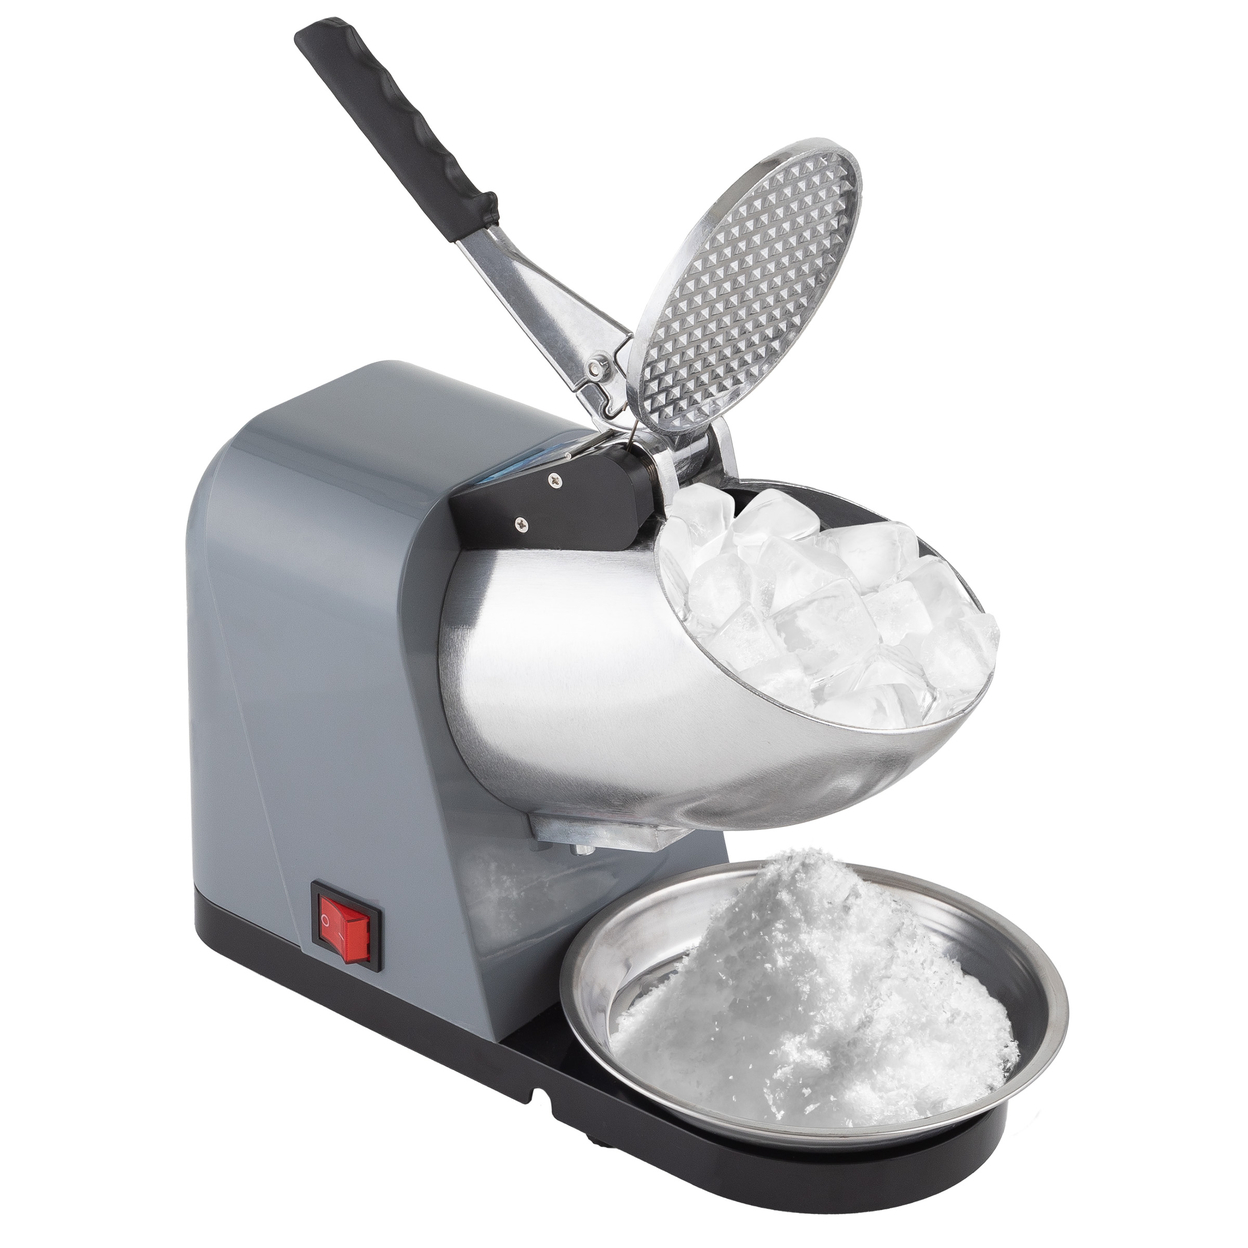 Snow Cone Machine Ice Shaver 170W Motor Countertop Crushed Ice Maker, Gray